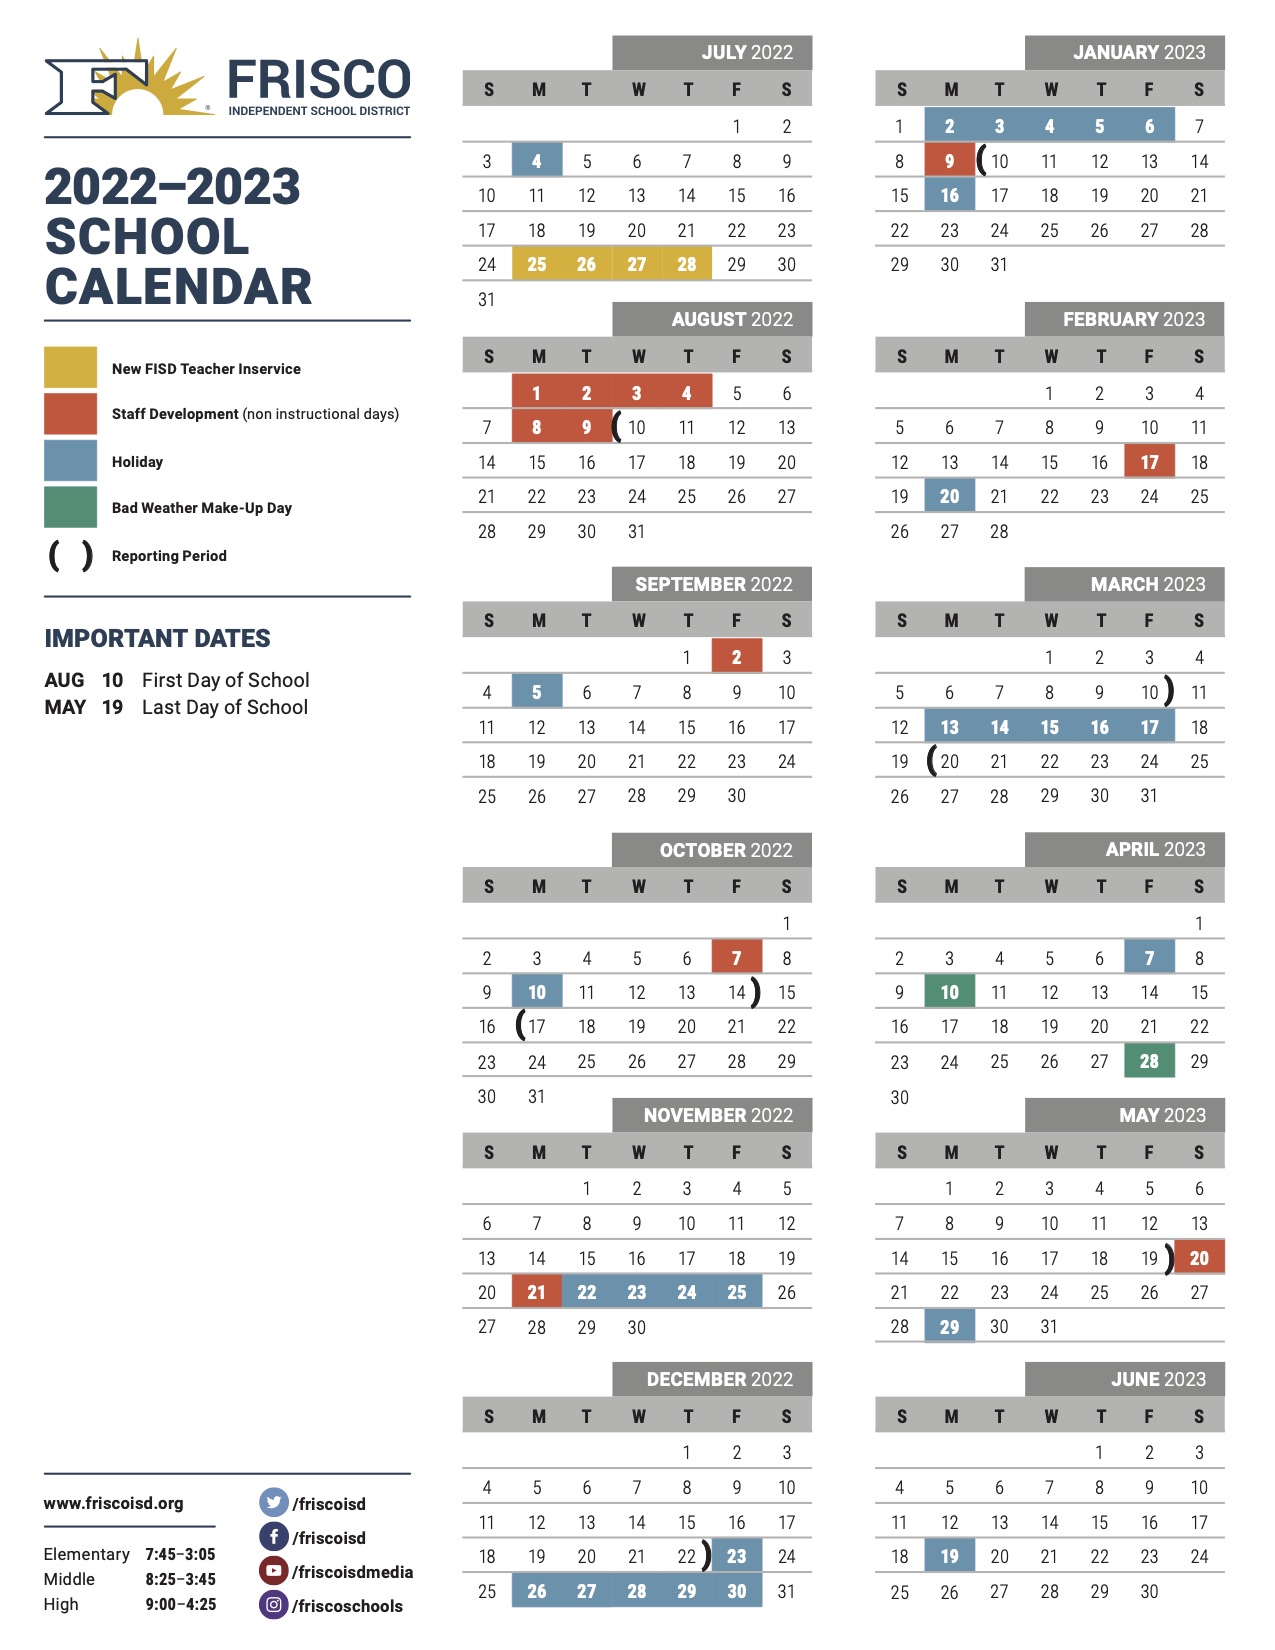 Mckinney Isd Calendar 2022 23 Frisco Isd On Twitter: "The Frisco Isd Academic Calendar Has Been Approved  For The 2022-23 School Year. Check Out Https://T.co/Jlvoekeccp For An  Overview Of The Calendar. Https://T.co/C8Gs8Lflru" / Twitter